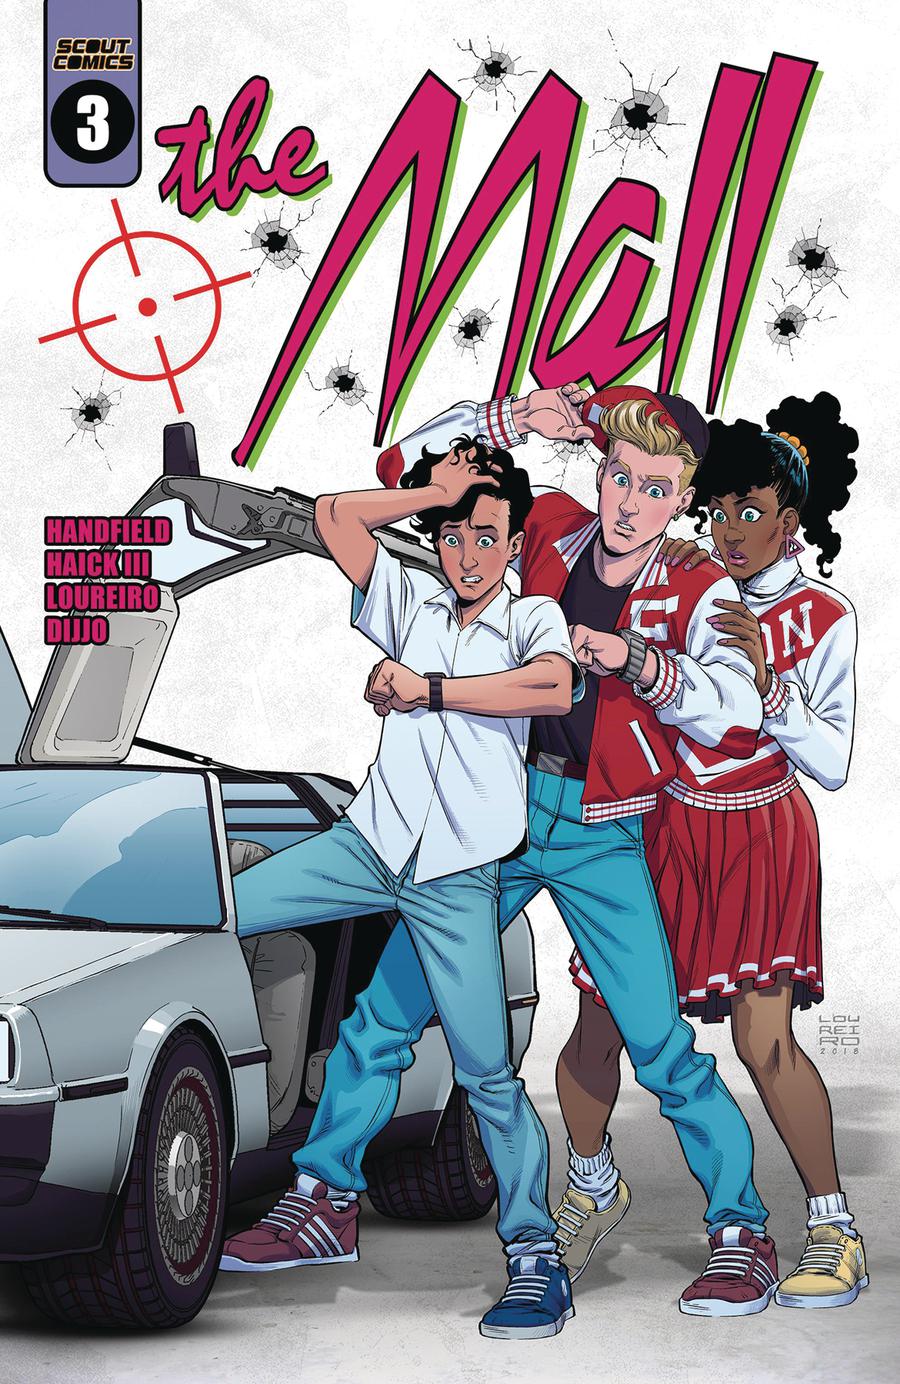 Mall (Scout Comics) #3 Cover A Regular Cover